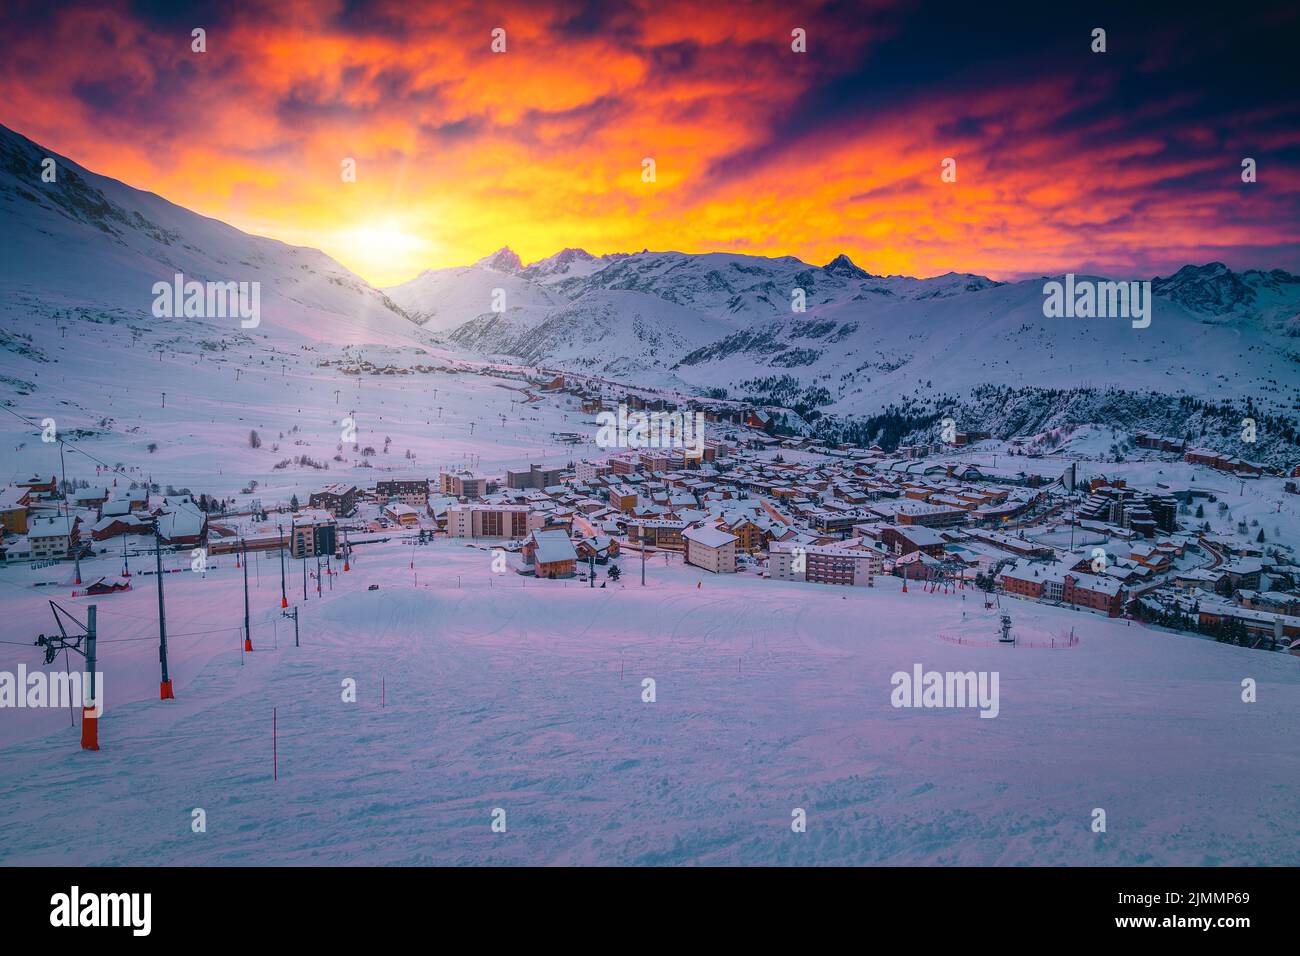 Stunning sunrise scenery with majestic colorful clouds over the ski resort, Alpe d Huez, France, Europe Stock Photo